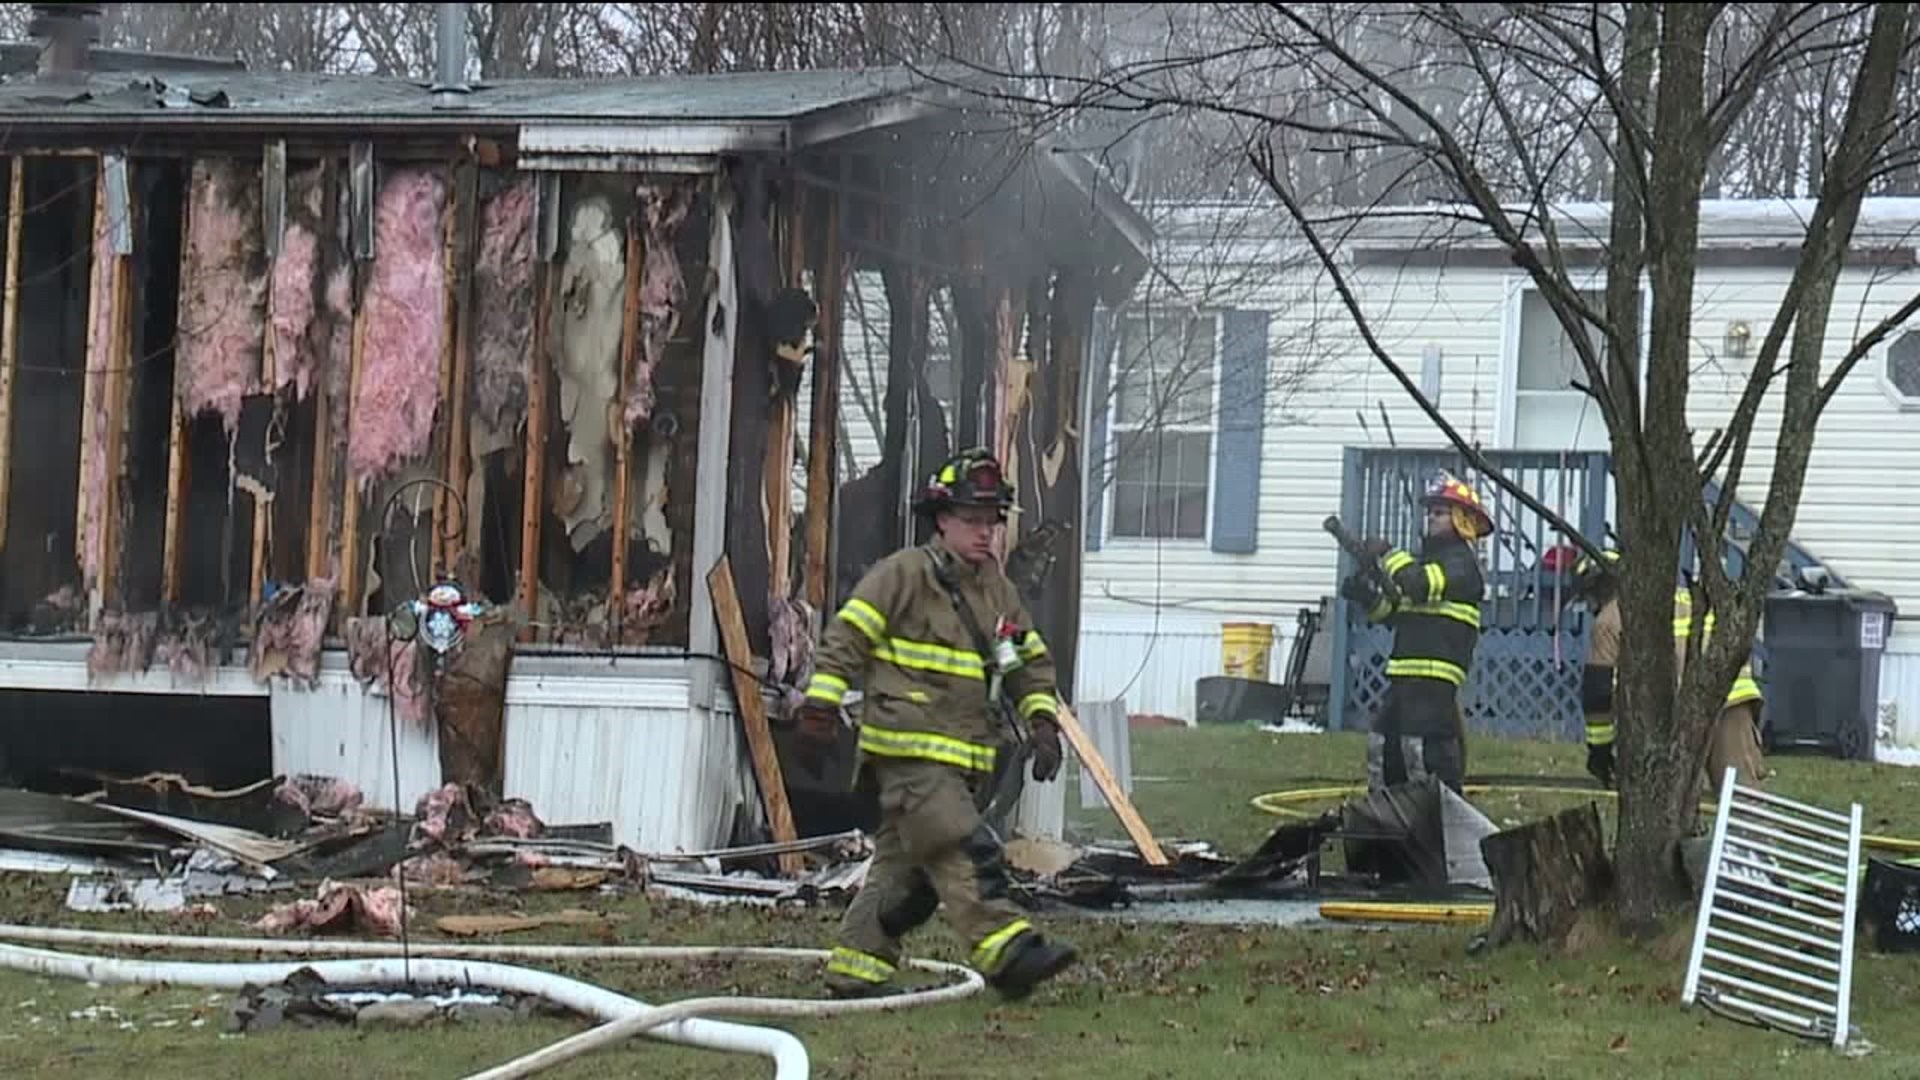 Mobile Home Gutted by Flames